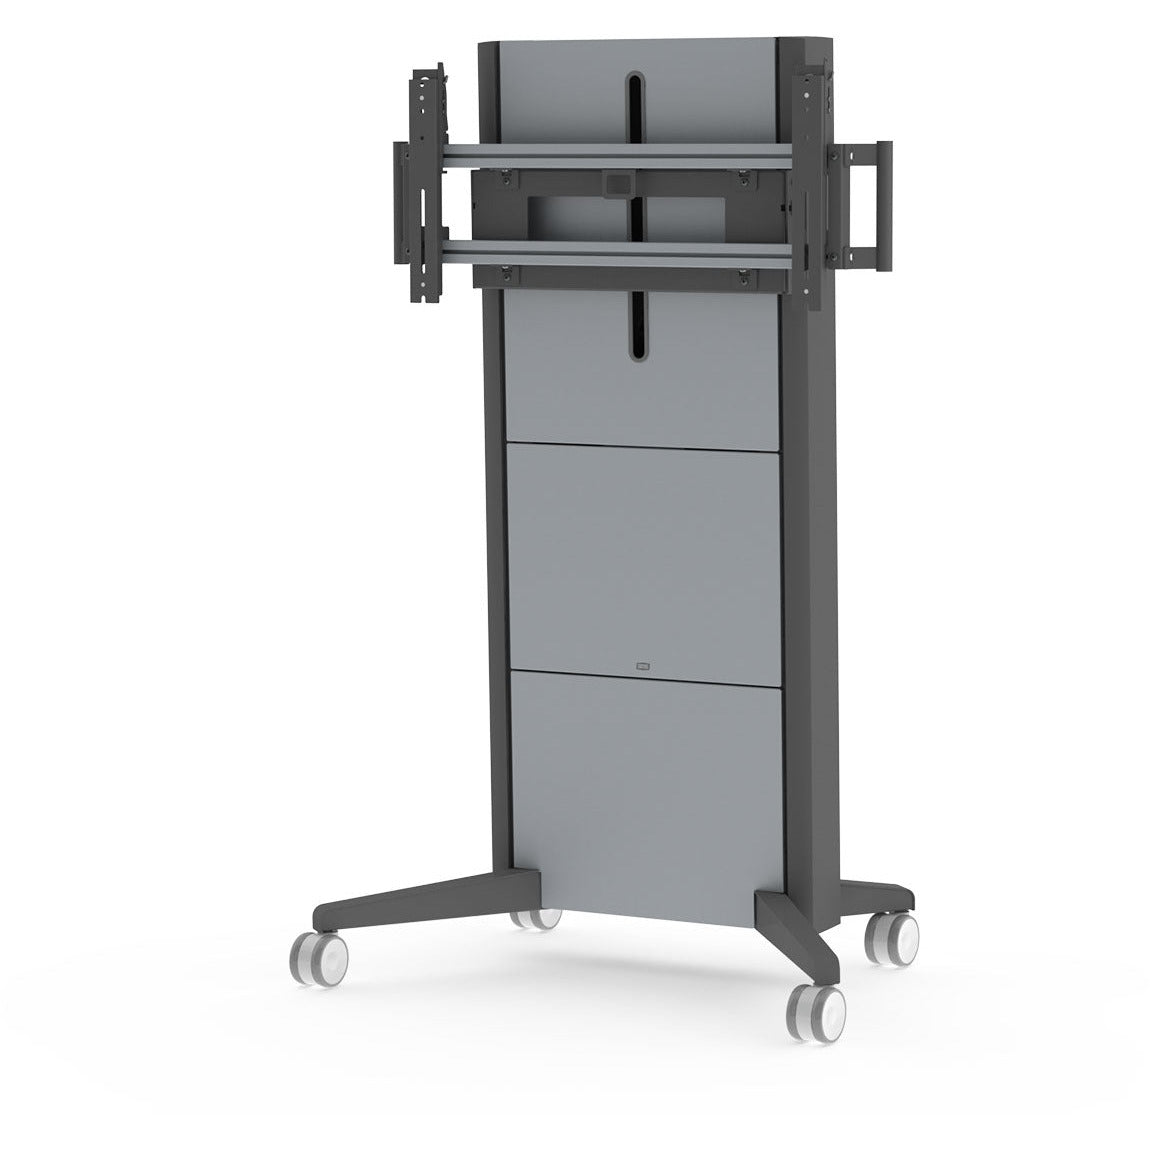 Slate Gray Sharp / NEC PD03MHA High End Mobile Height Adjustable Trolley for interactive LFDs from 46" to 98"